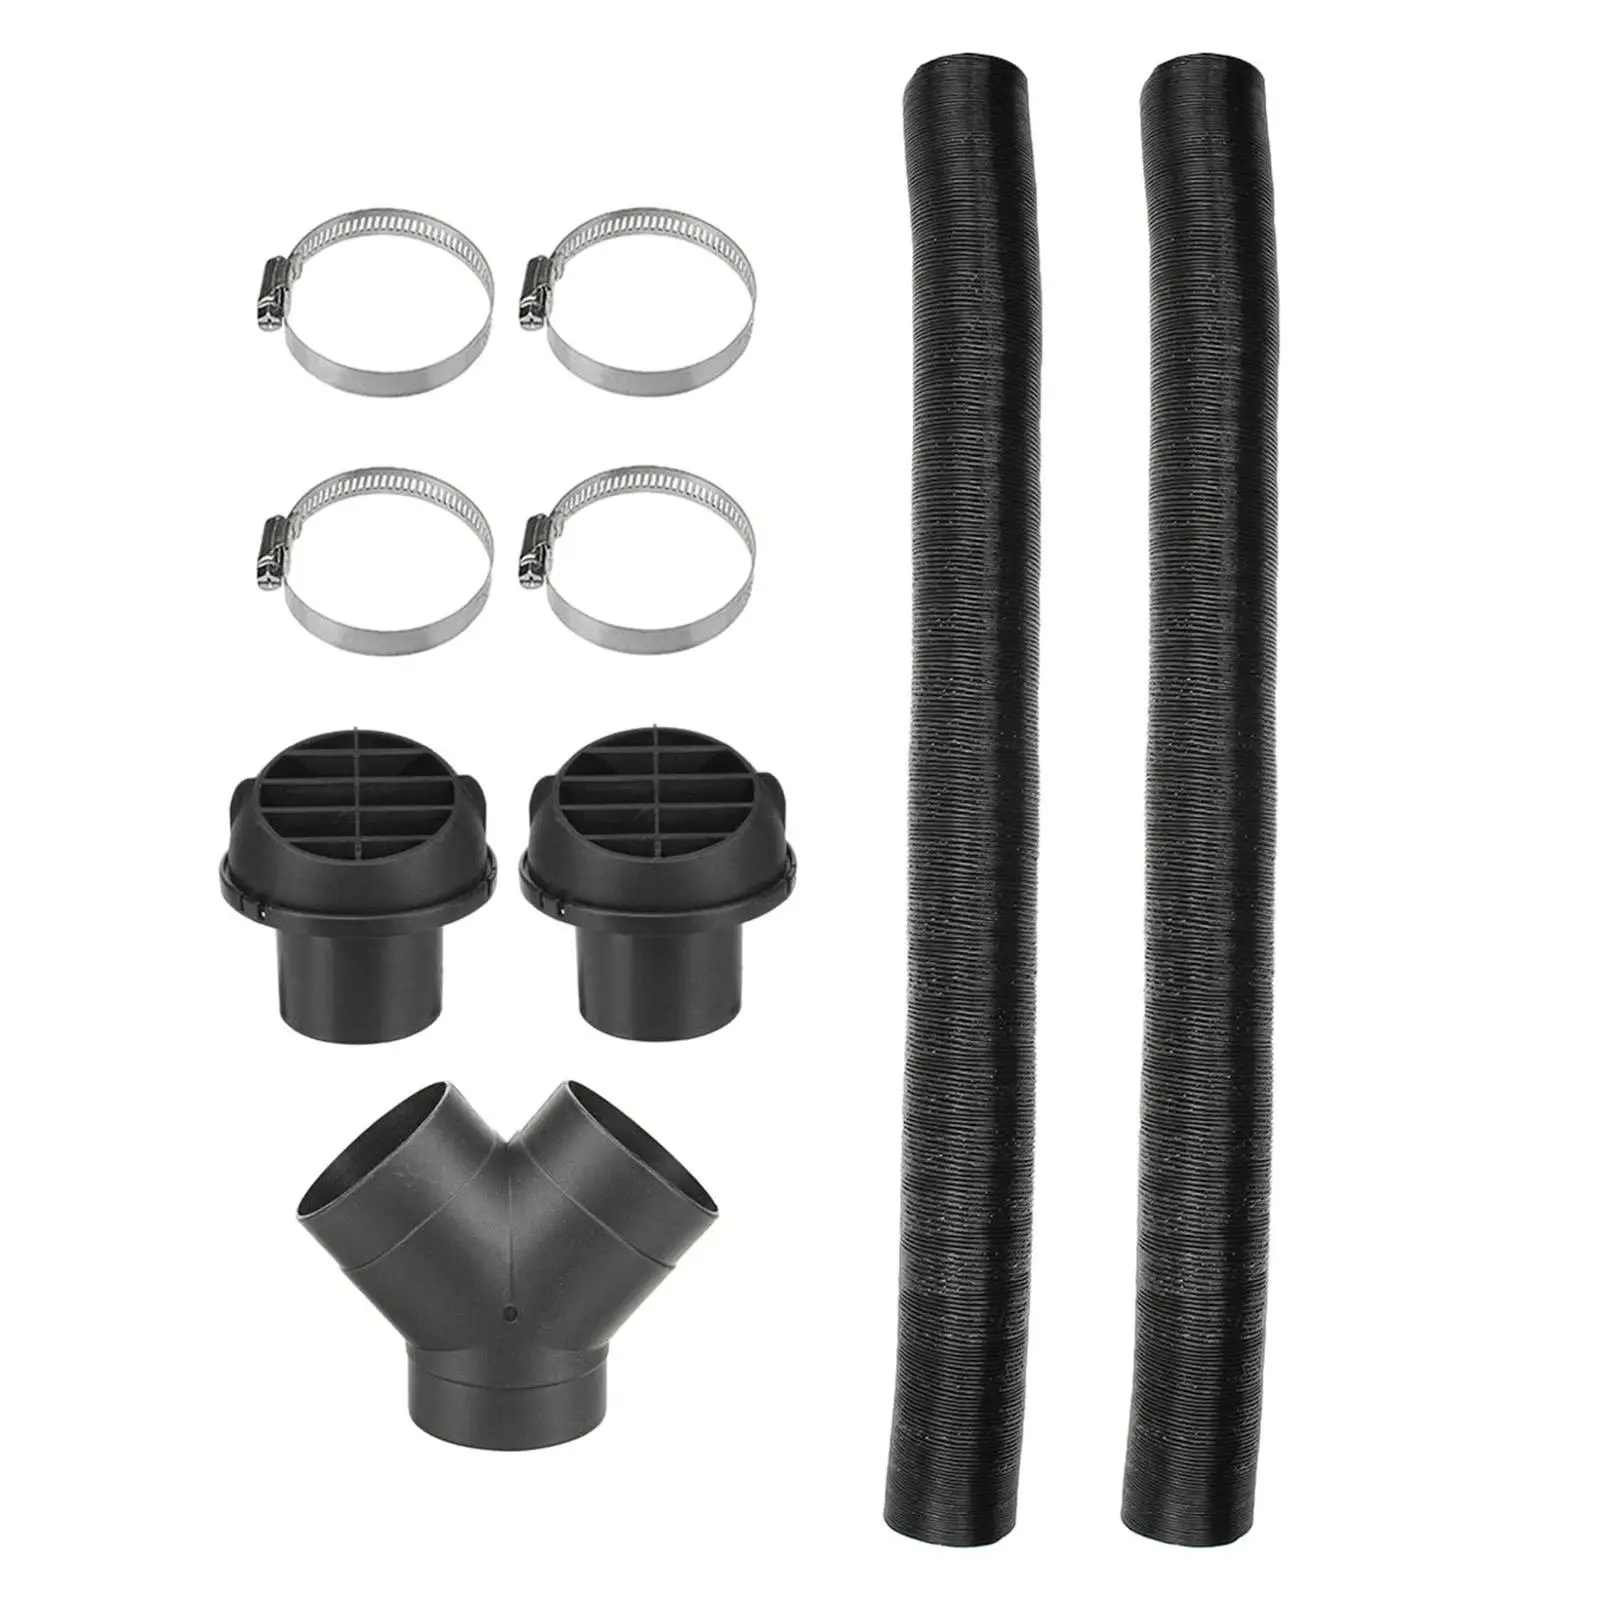 Heater Pipe 75mm Car Auto Heater Pipe Duct T Type Y Warm Air Outlet Vent Hose Clips Set for Parking Heater For Webast